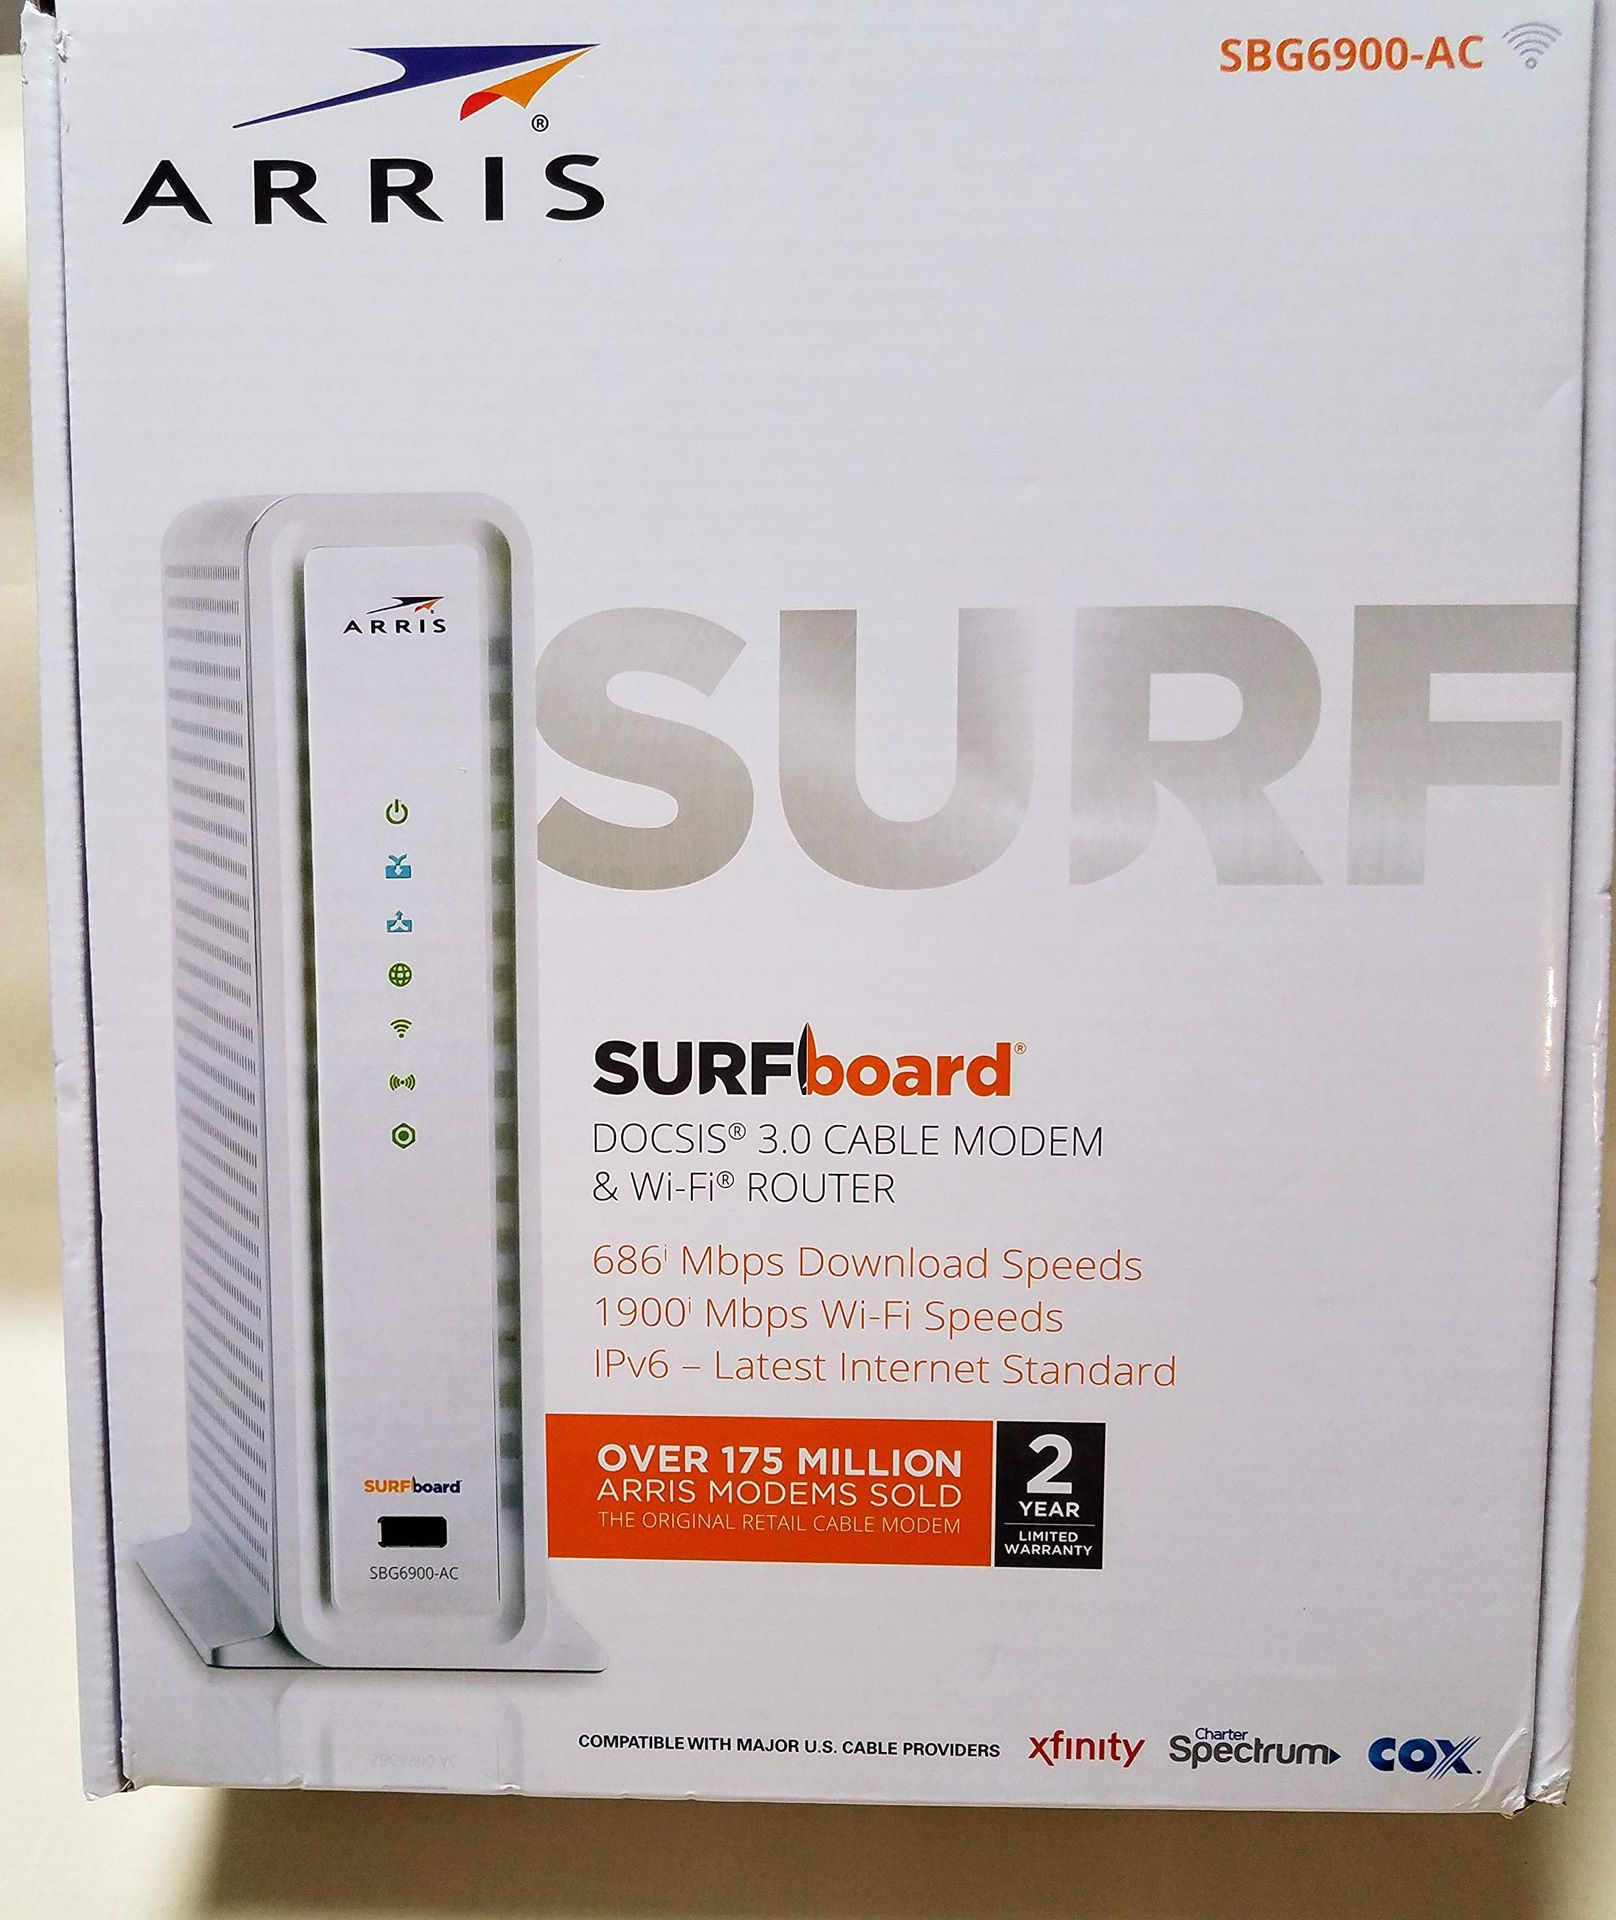 Used Like New Arris SBG6900-AC Cable Modem/WiFi/Router